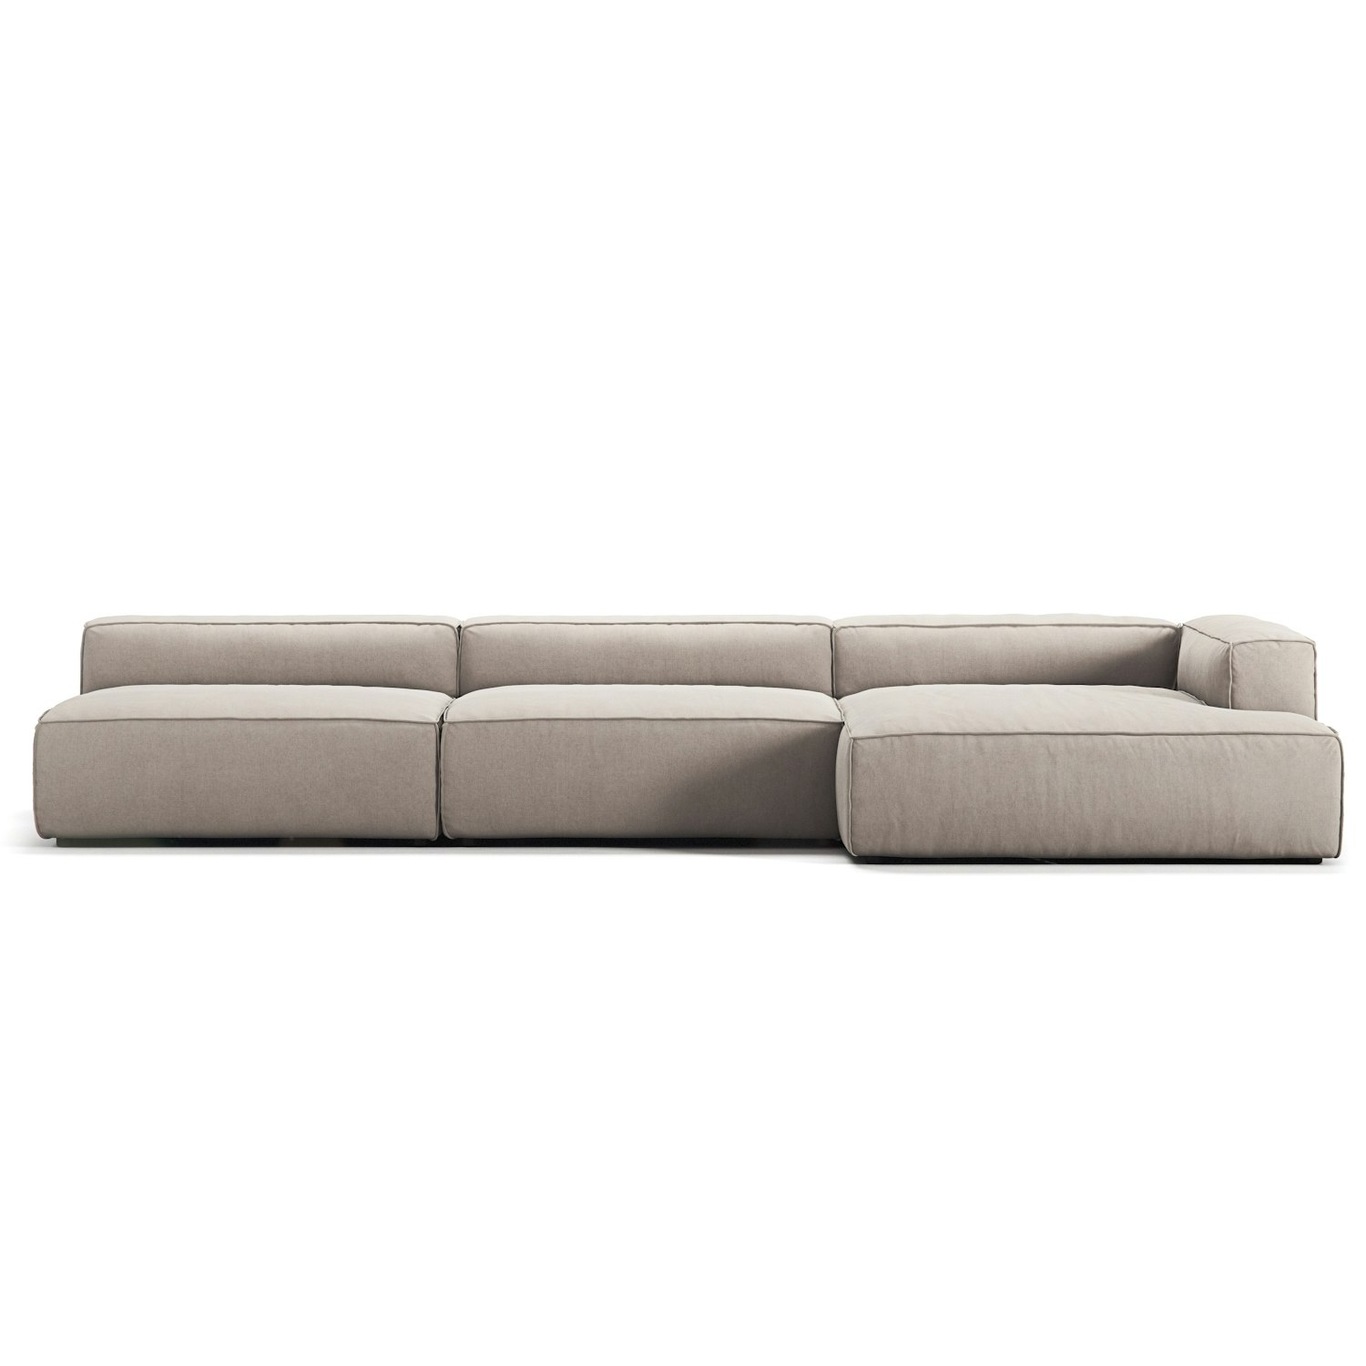 Grand 5 Seater Sofa chaise Longue Right, Sandshell Beige